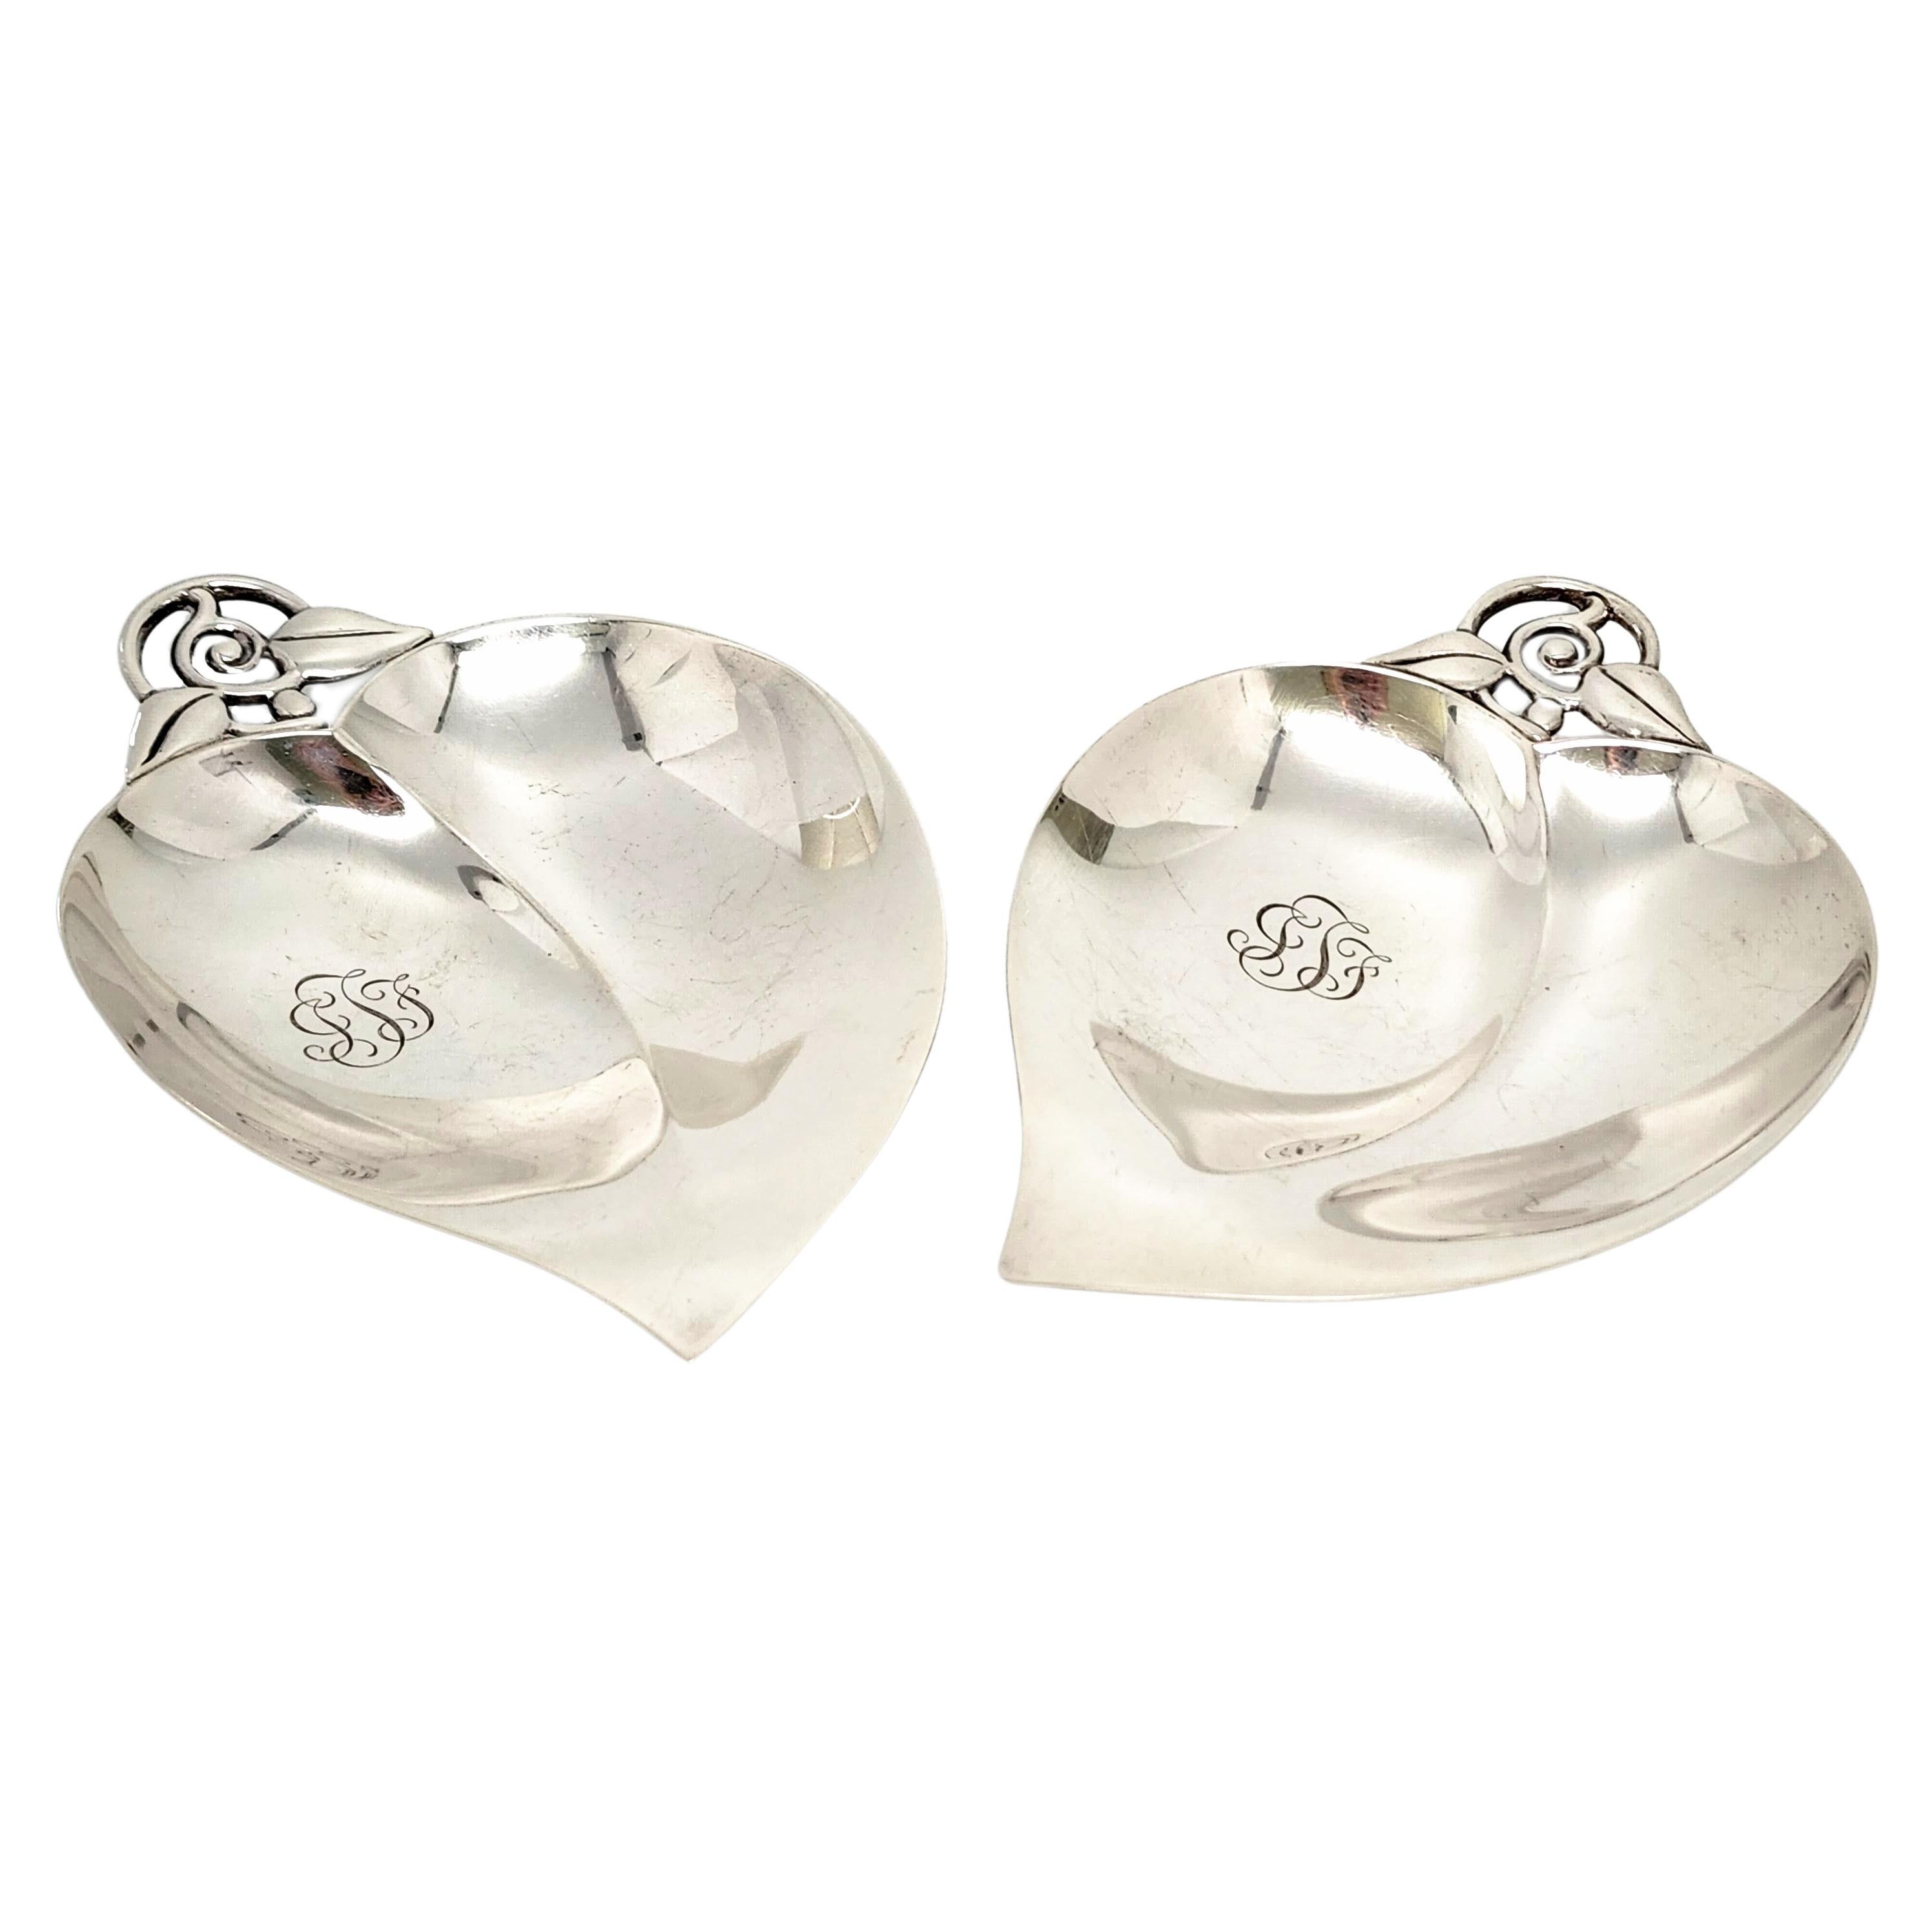 Set of 2 Tiffany & Co Sterling Silver Heart/Apple Bowls with Monogram For Sale 2